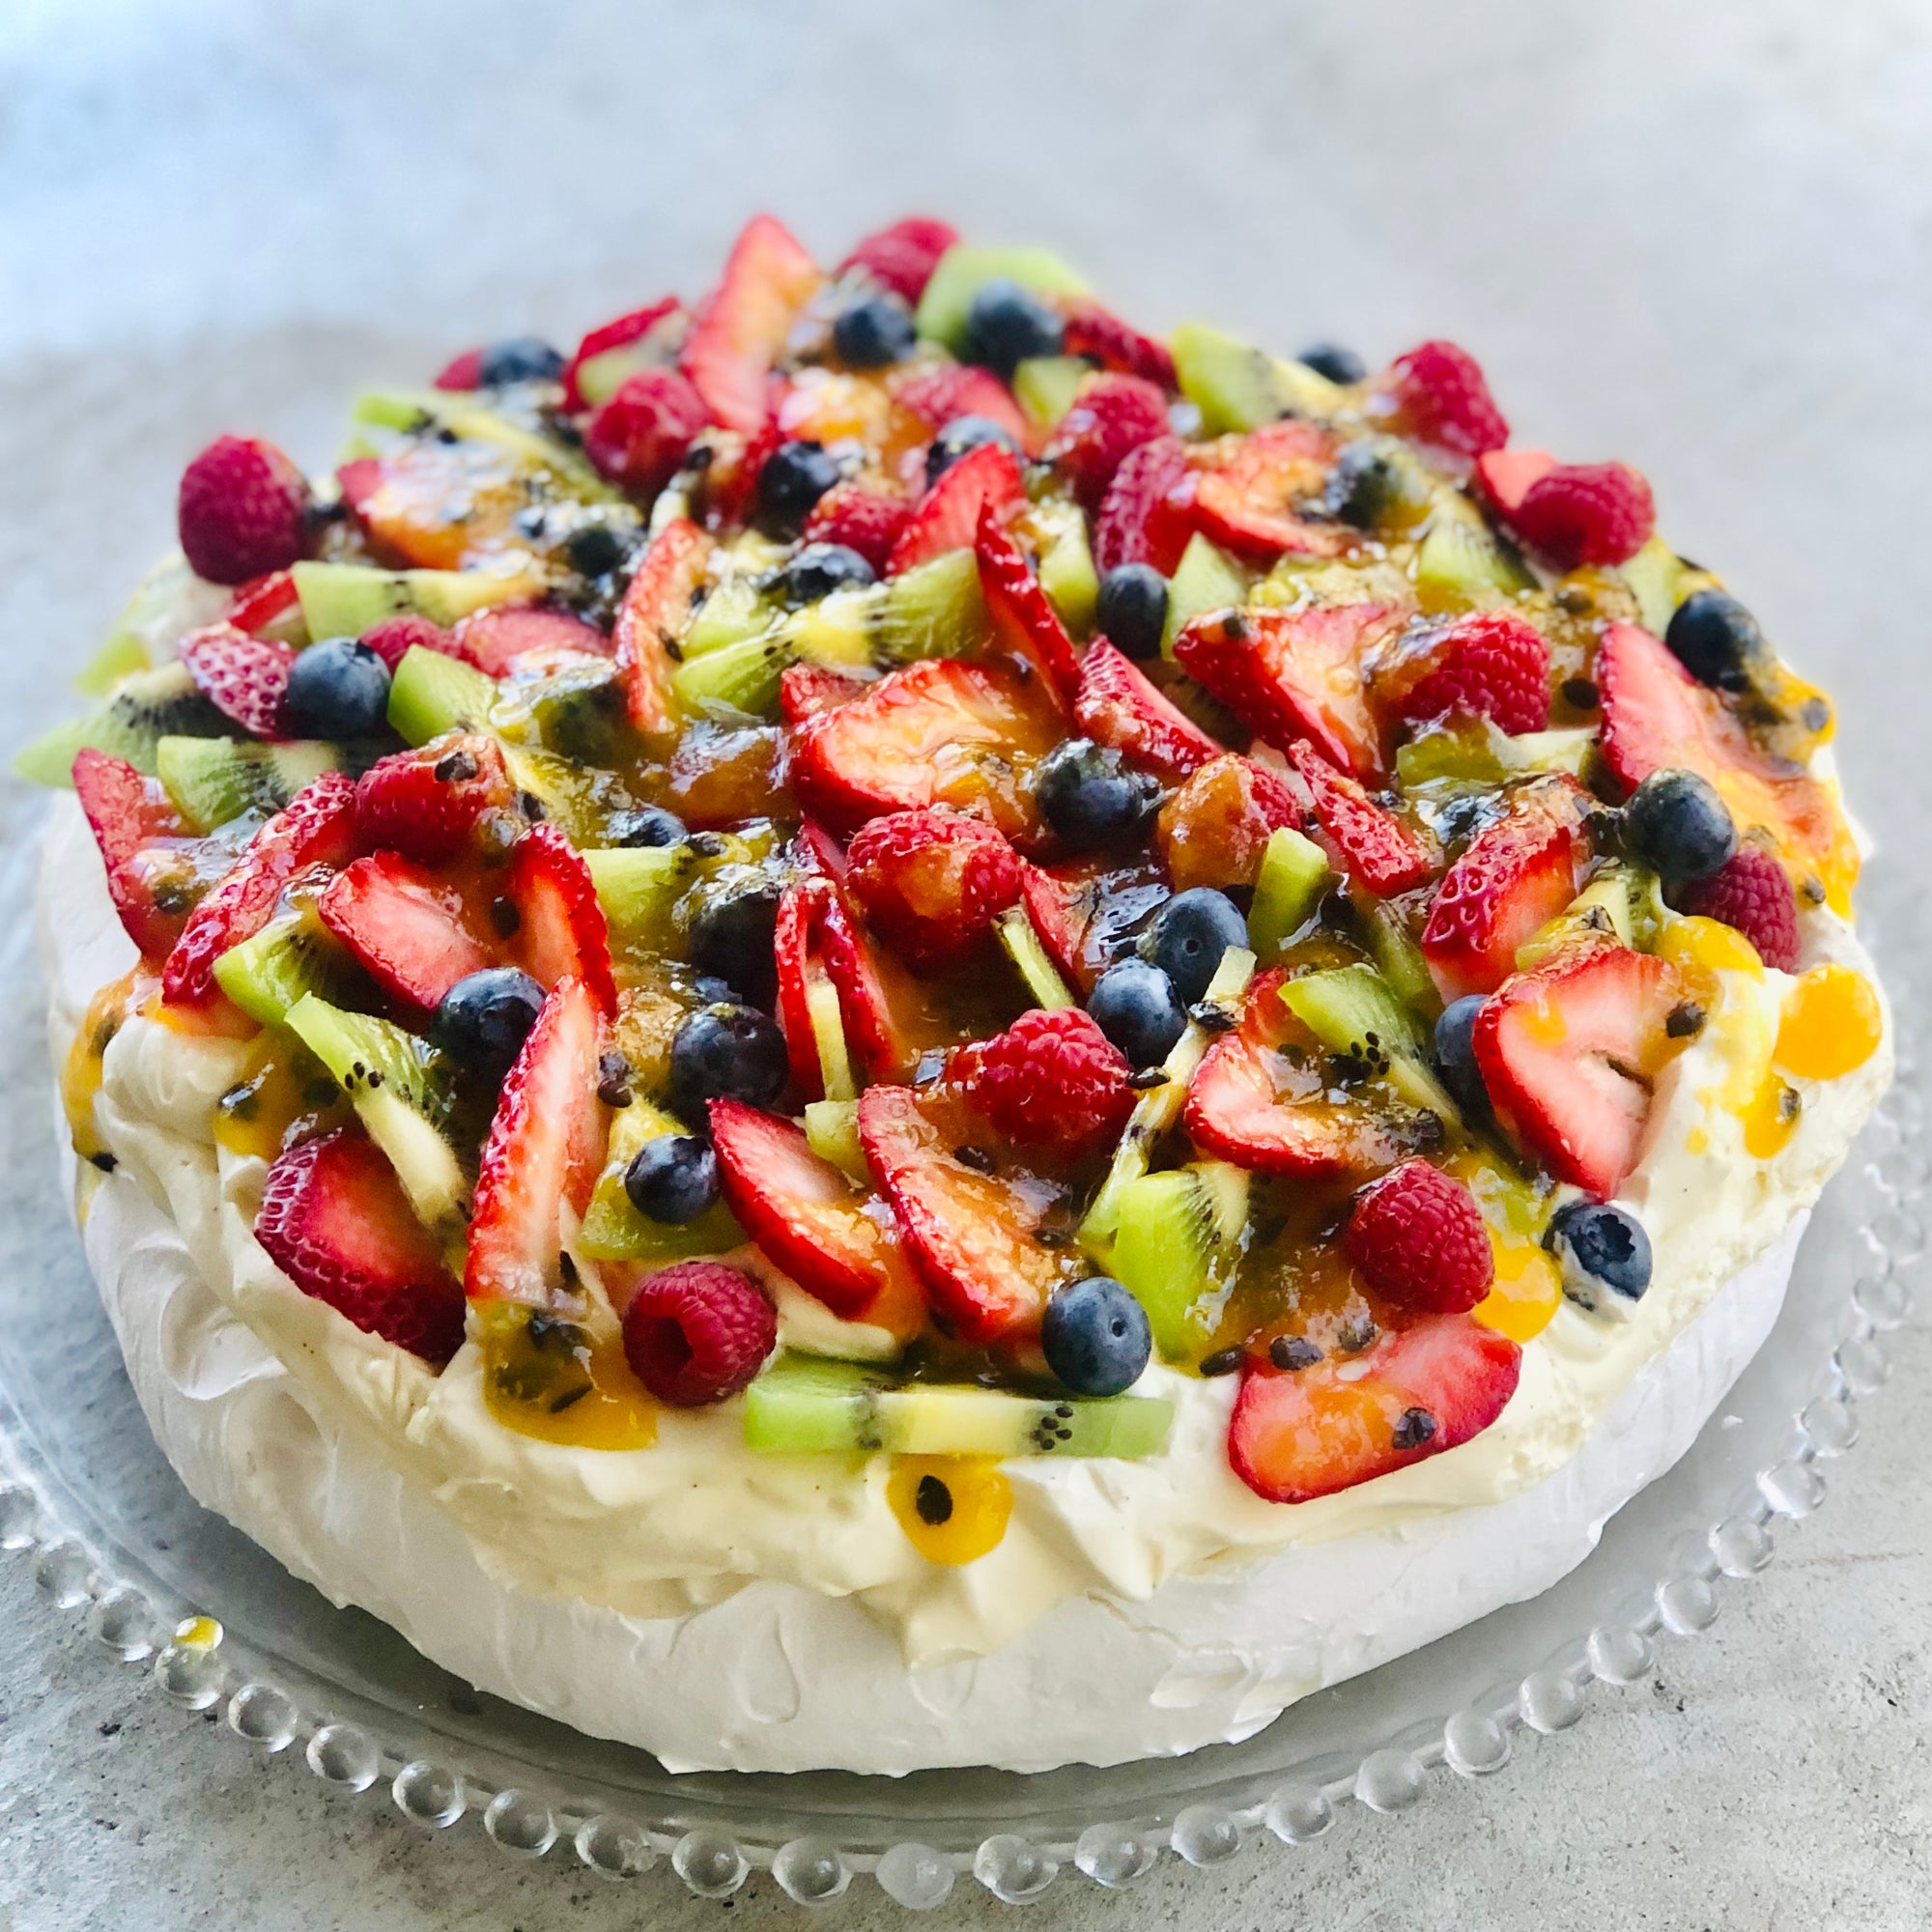 A Dello Mano Pavlova with strawberries, kiwifruit, blueberries and passionfruit